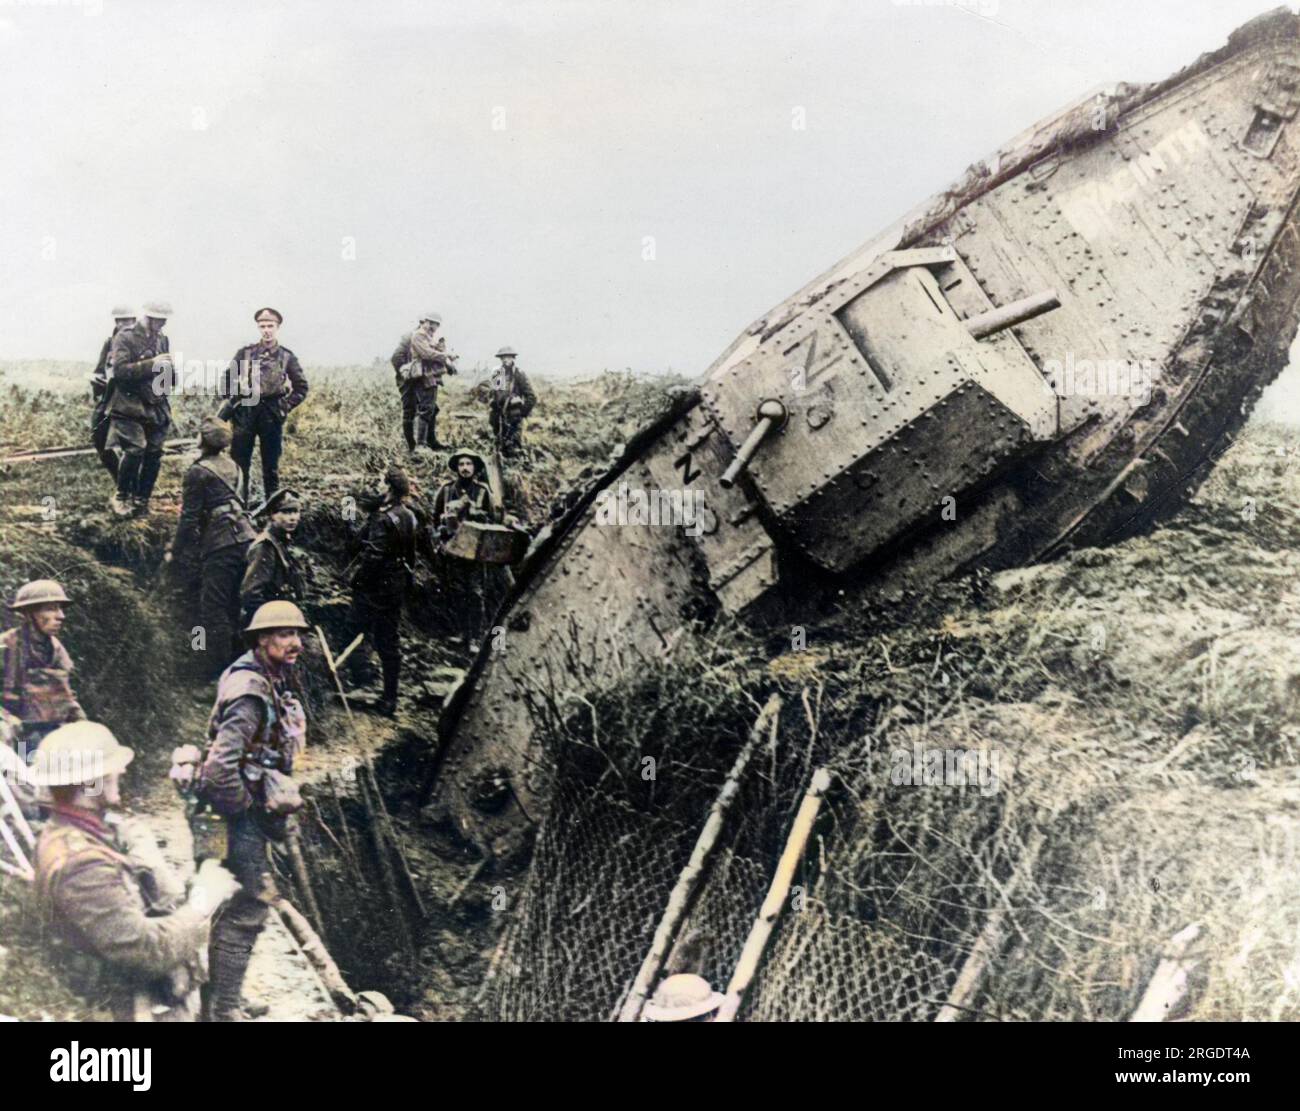 Men of the 1st Leicester Regiment, 6th Division, in and around a captured German second line trench, one mile west of Ribecourt, northern France, during the Battle of Cambrai, First World War.  A tank of H Battalion, with the name Hyacinth painted on its side, stalled when trying to cross the trench. Stock Photo